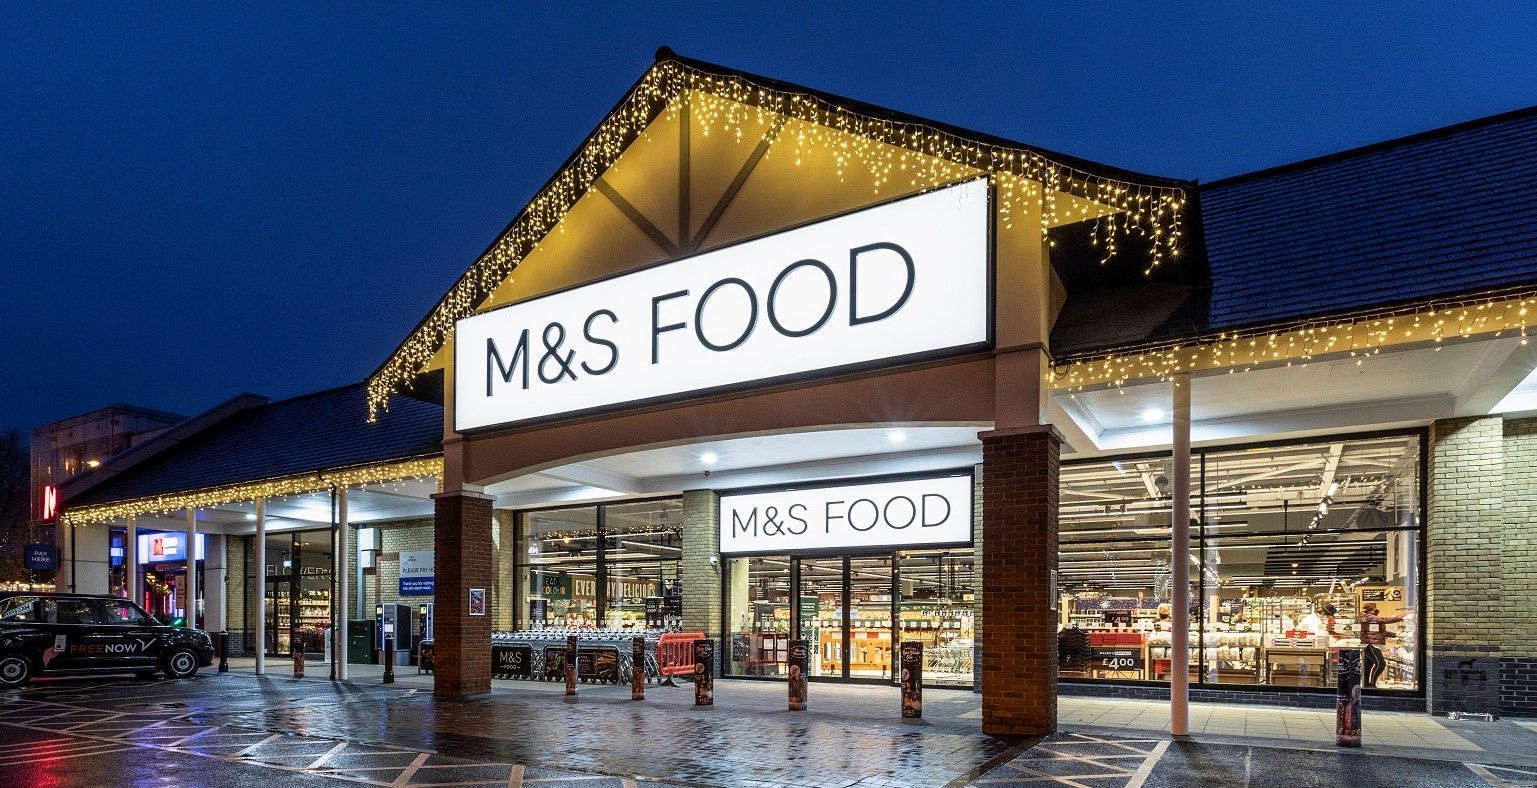 Leeds-headquartered Widd Signs creates striking store signage for M&S